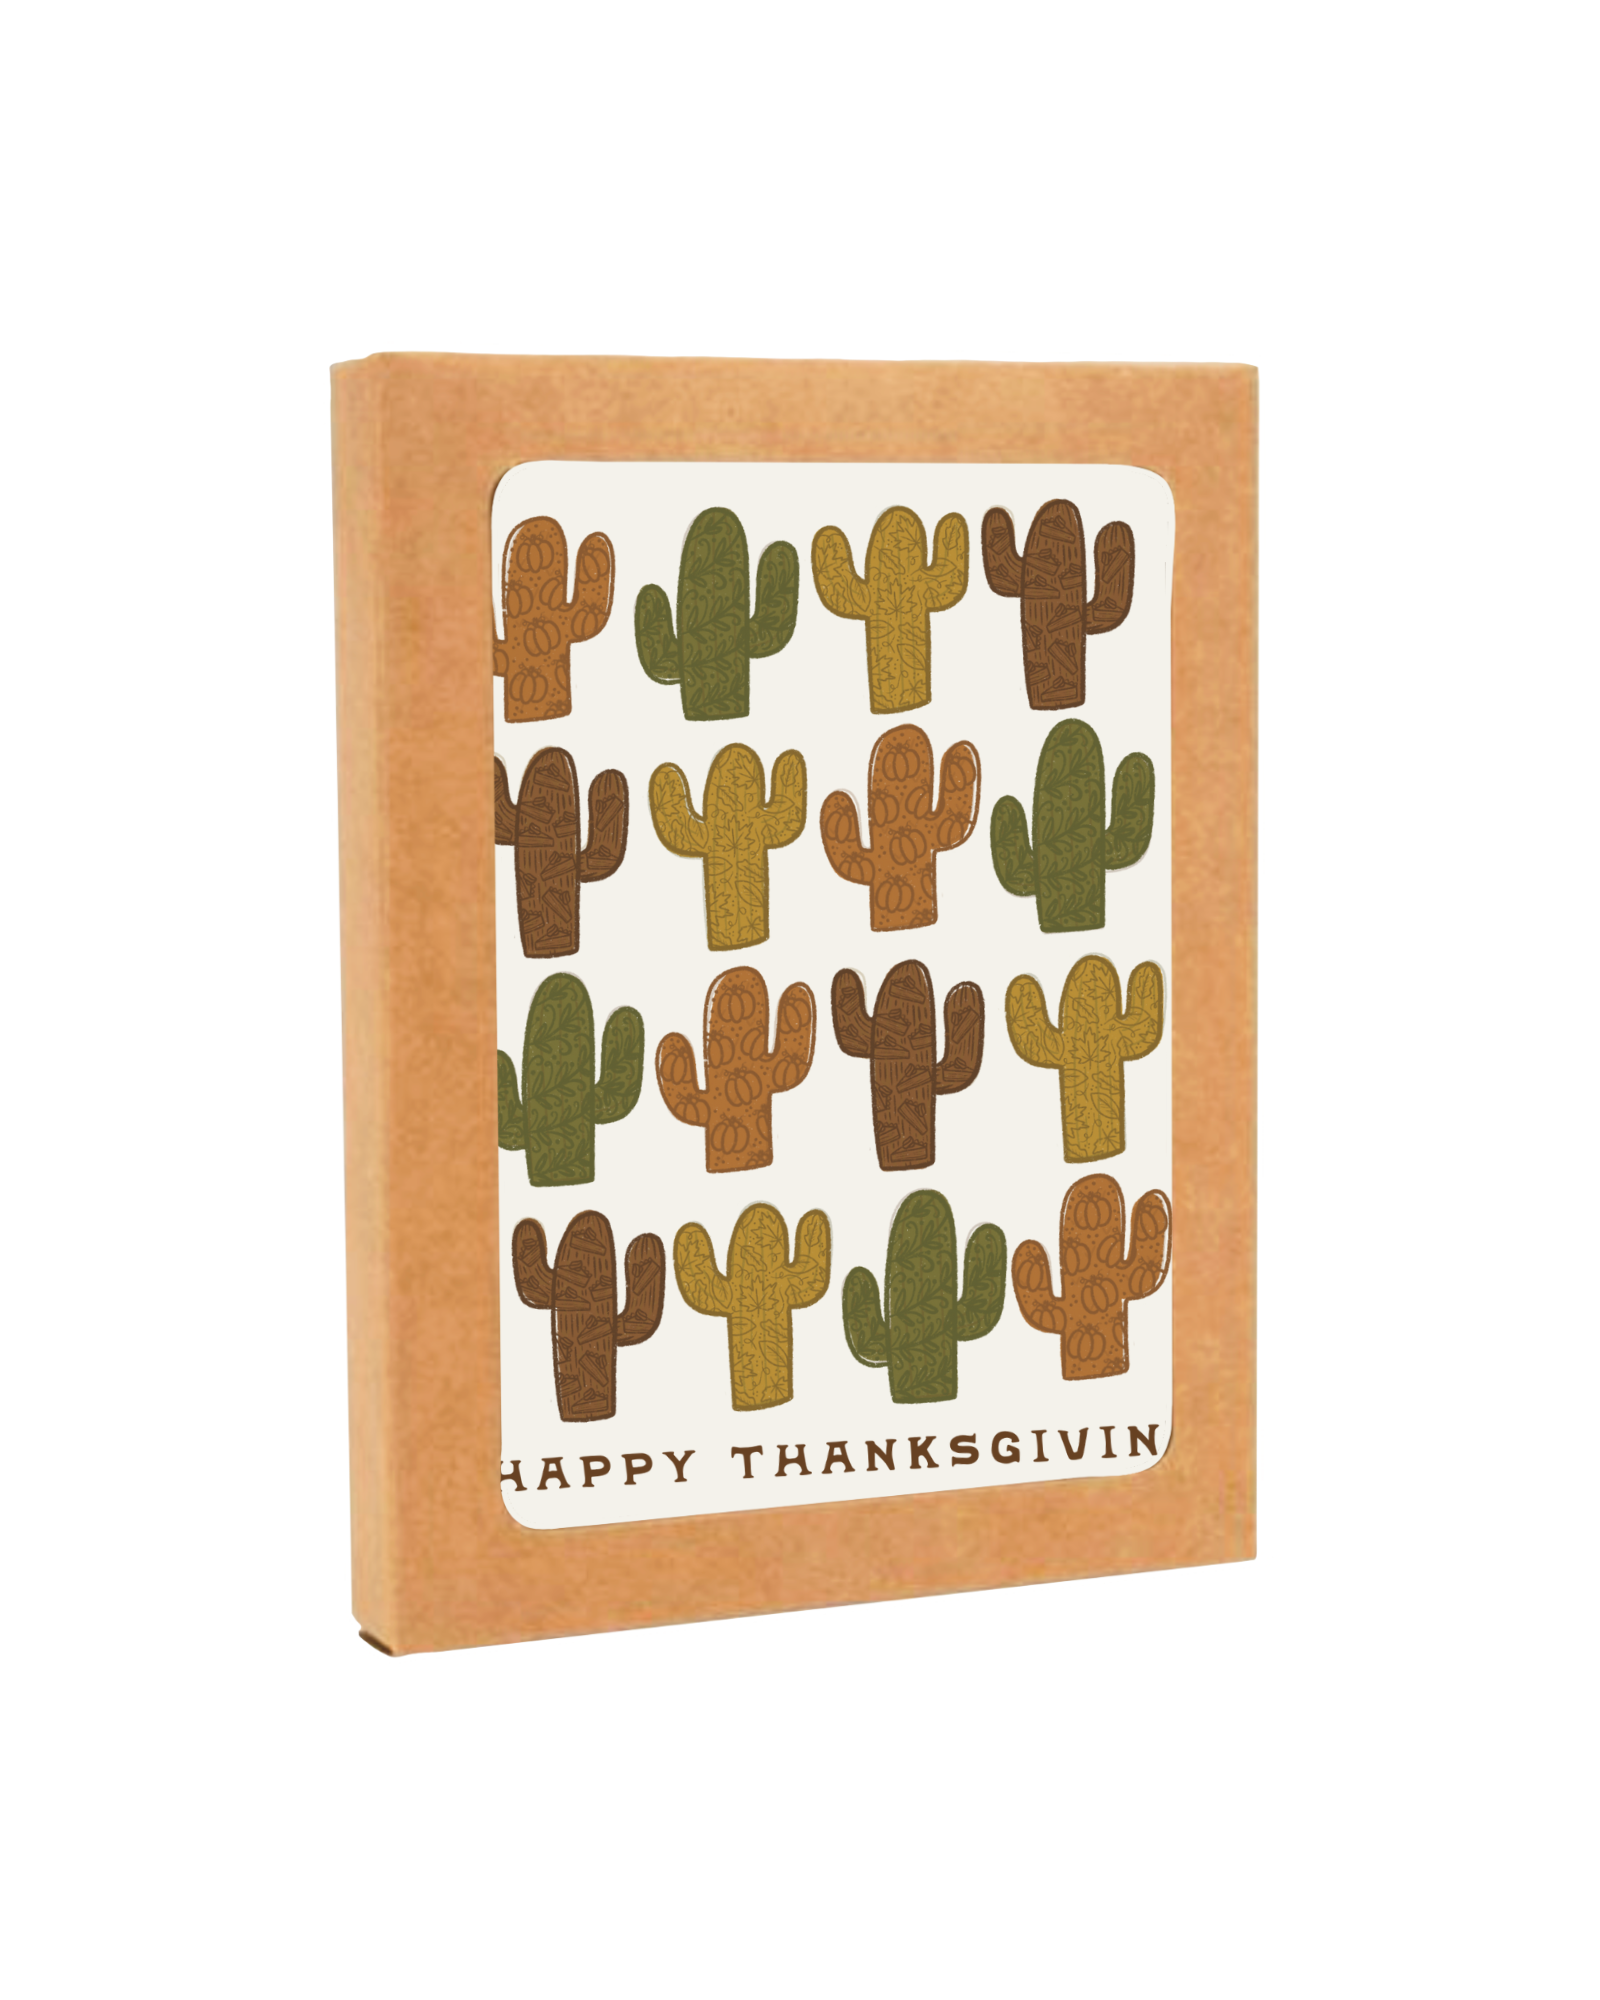 set of 8 happy thanksgiving cactus greeting cards in a kraft box